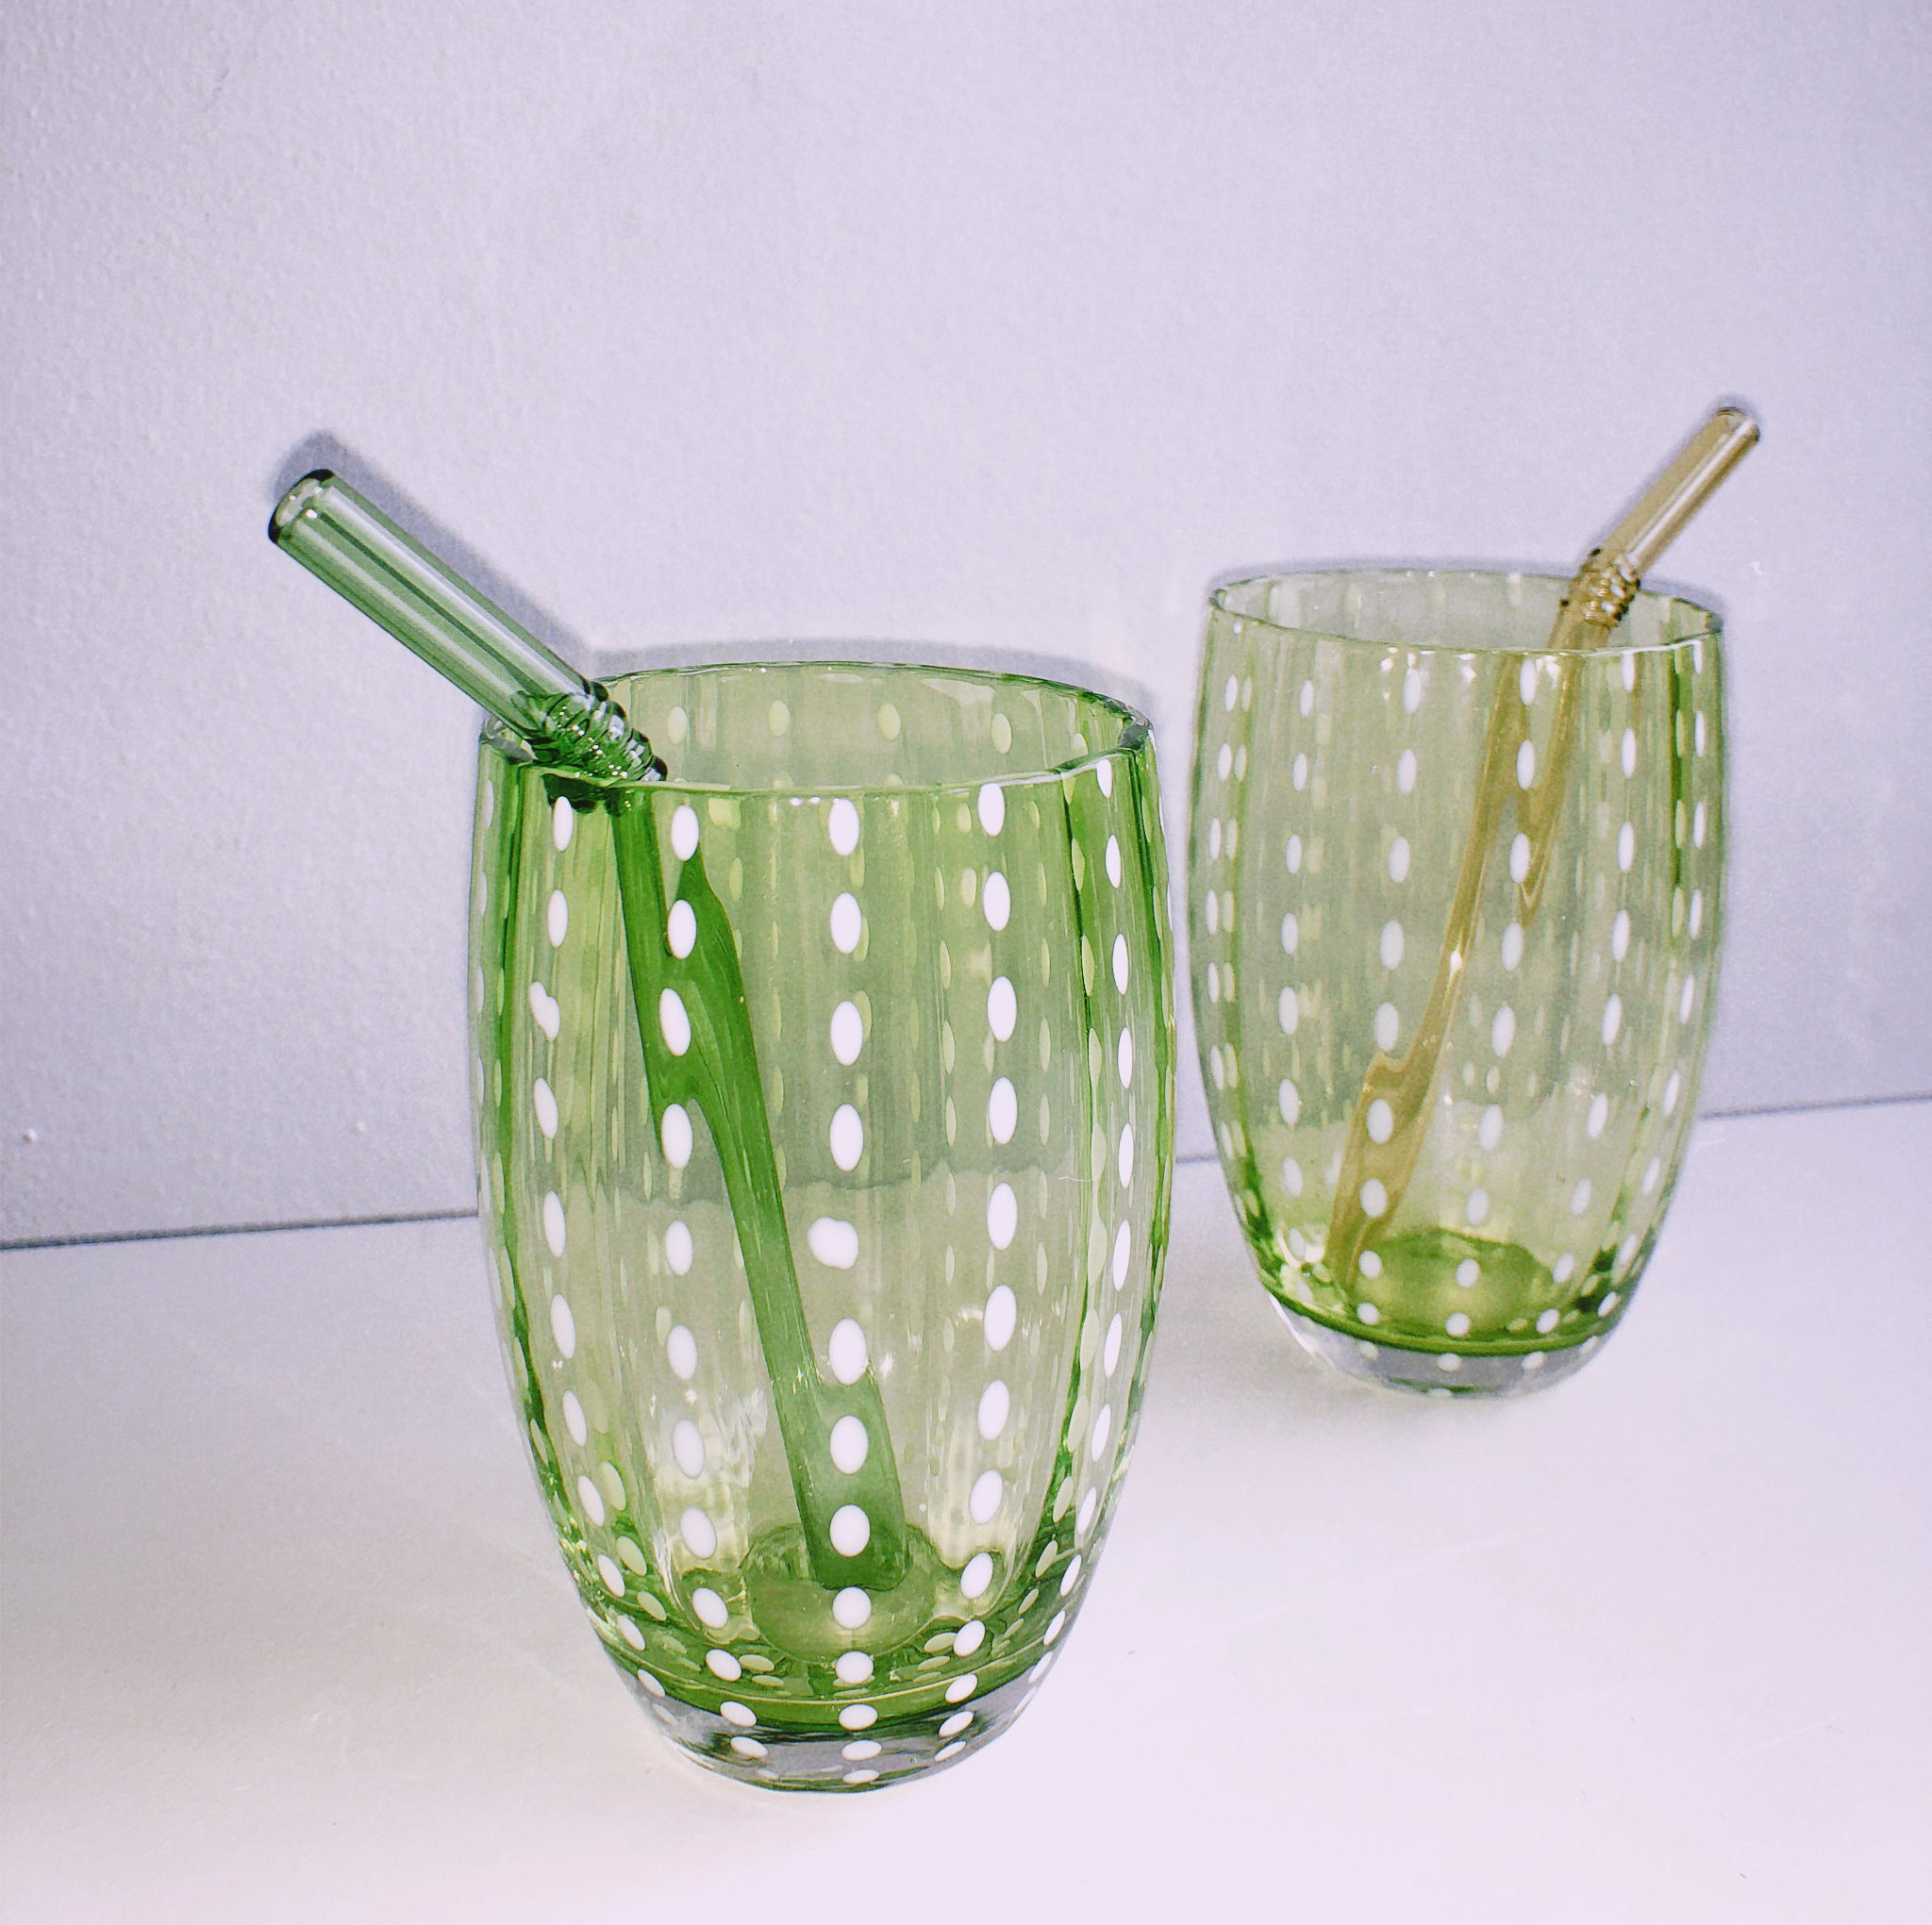 Handmade Watermelon Glasses in Lime by PROSE Tabletop